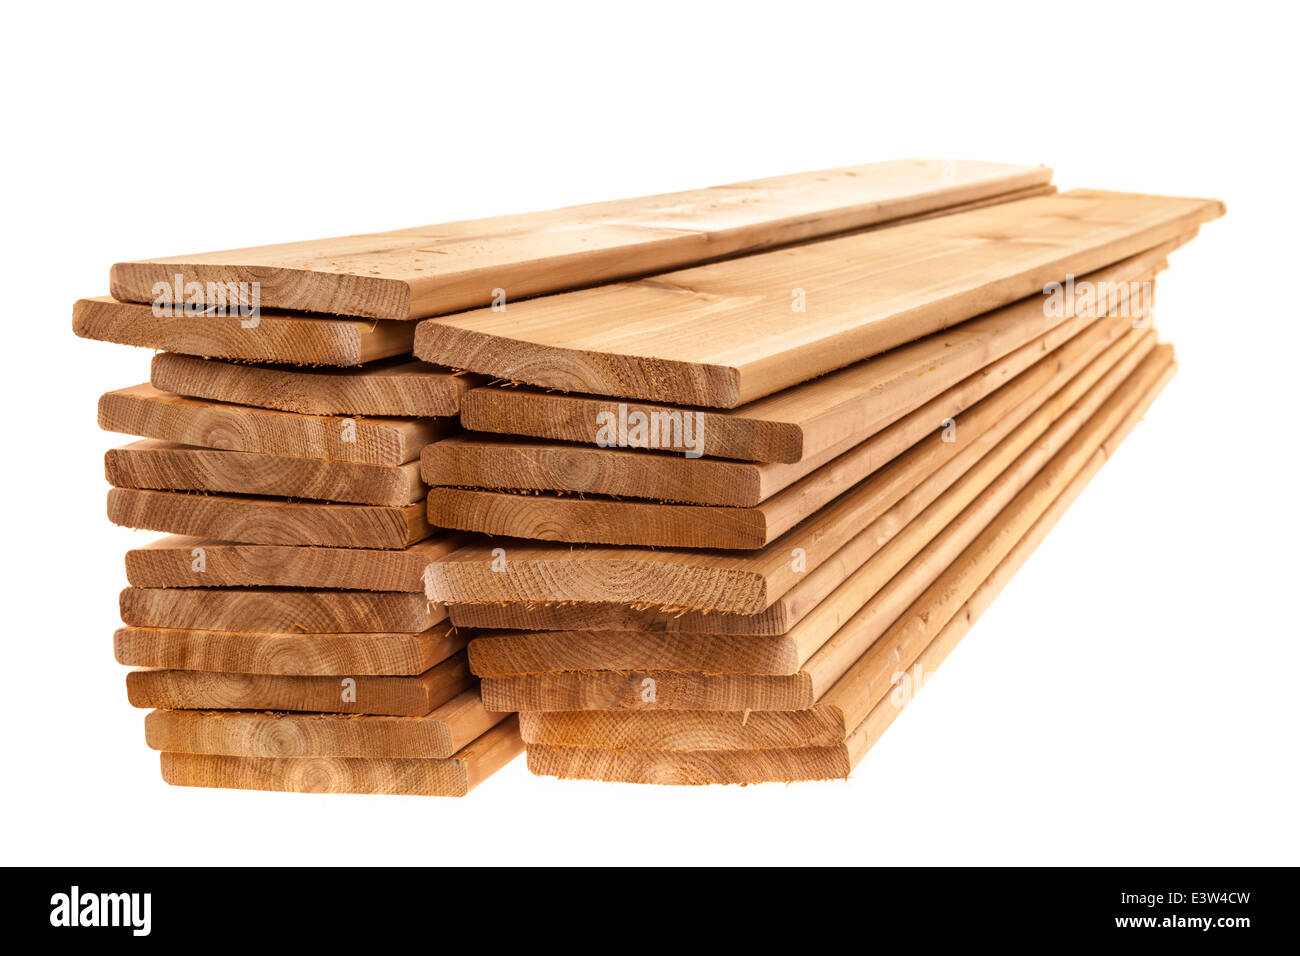 Stacks of one by six inch cedar boards on white background Stock Photo